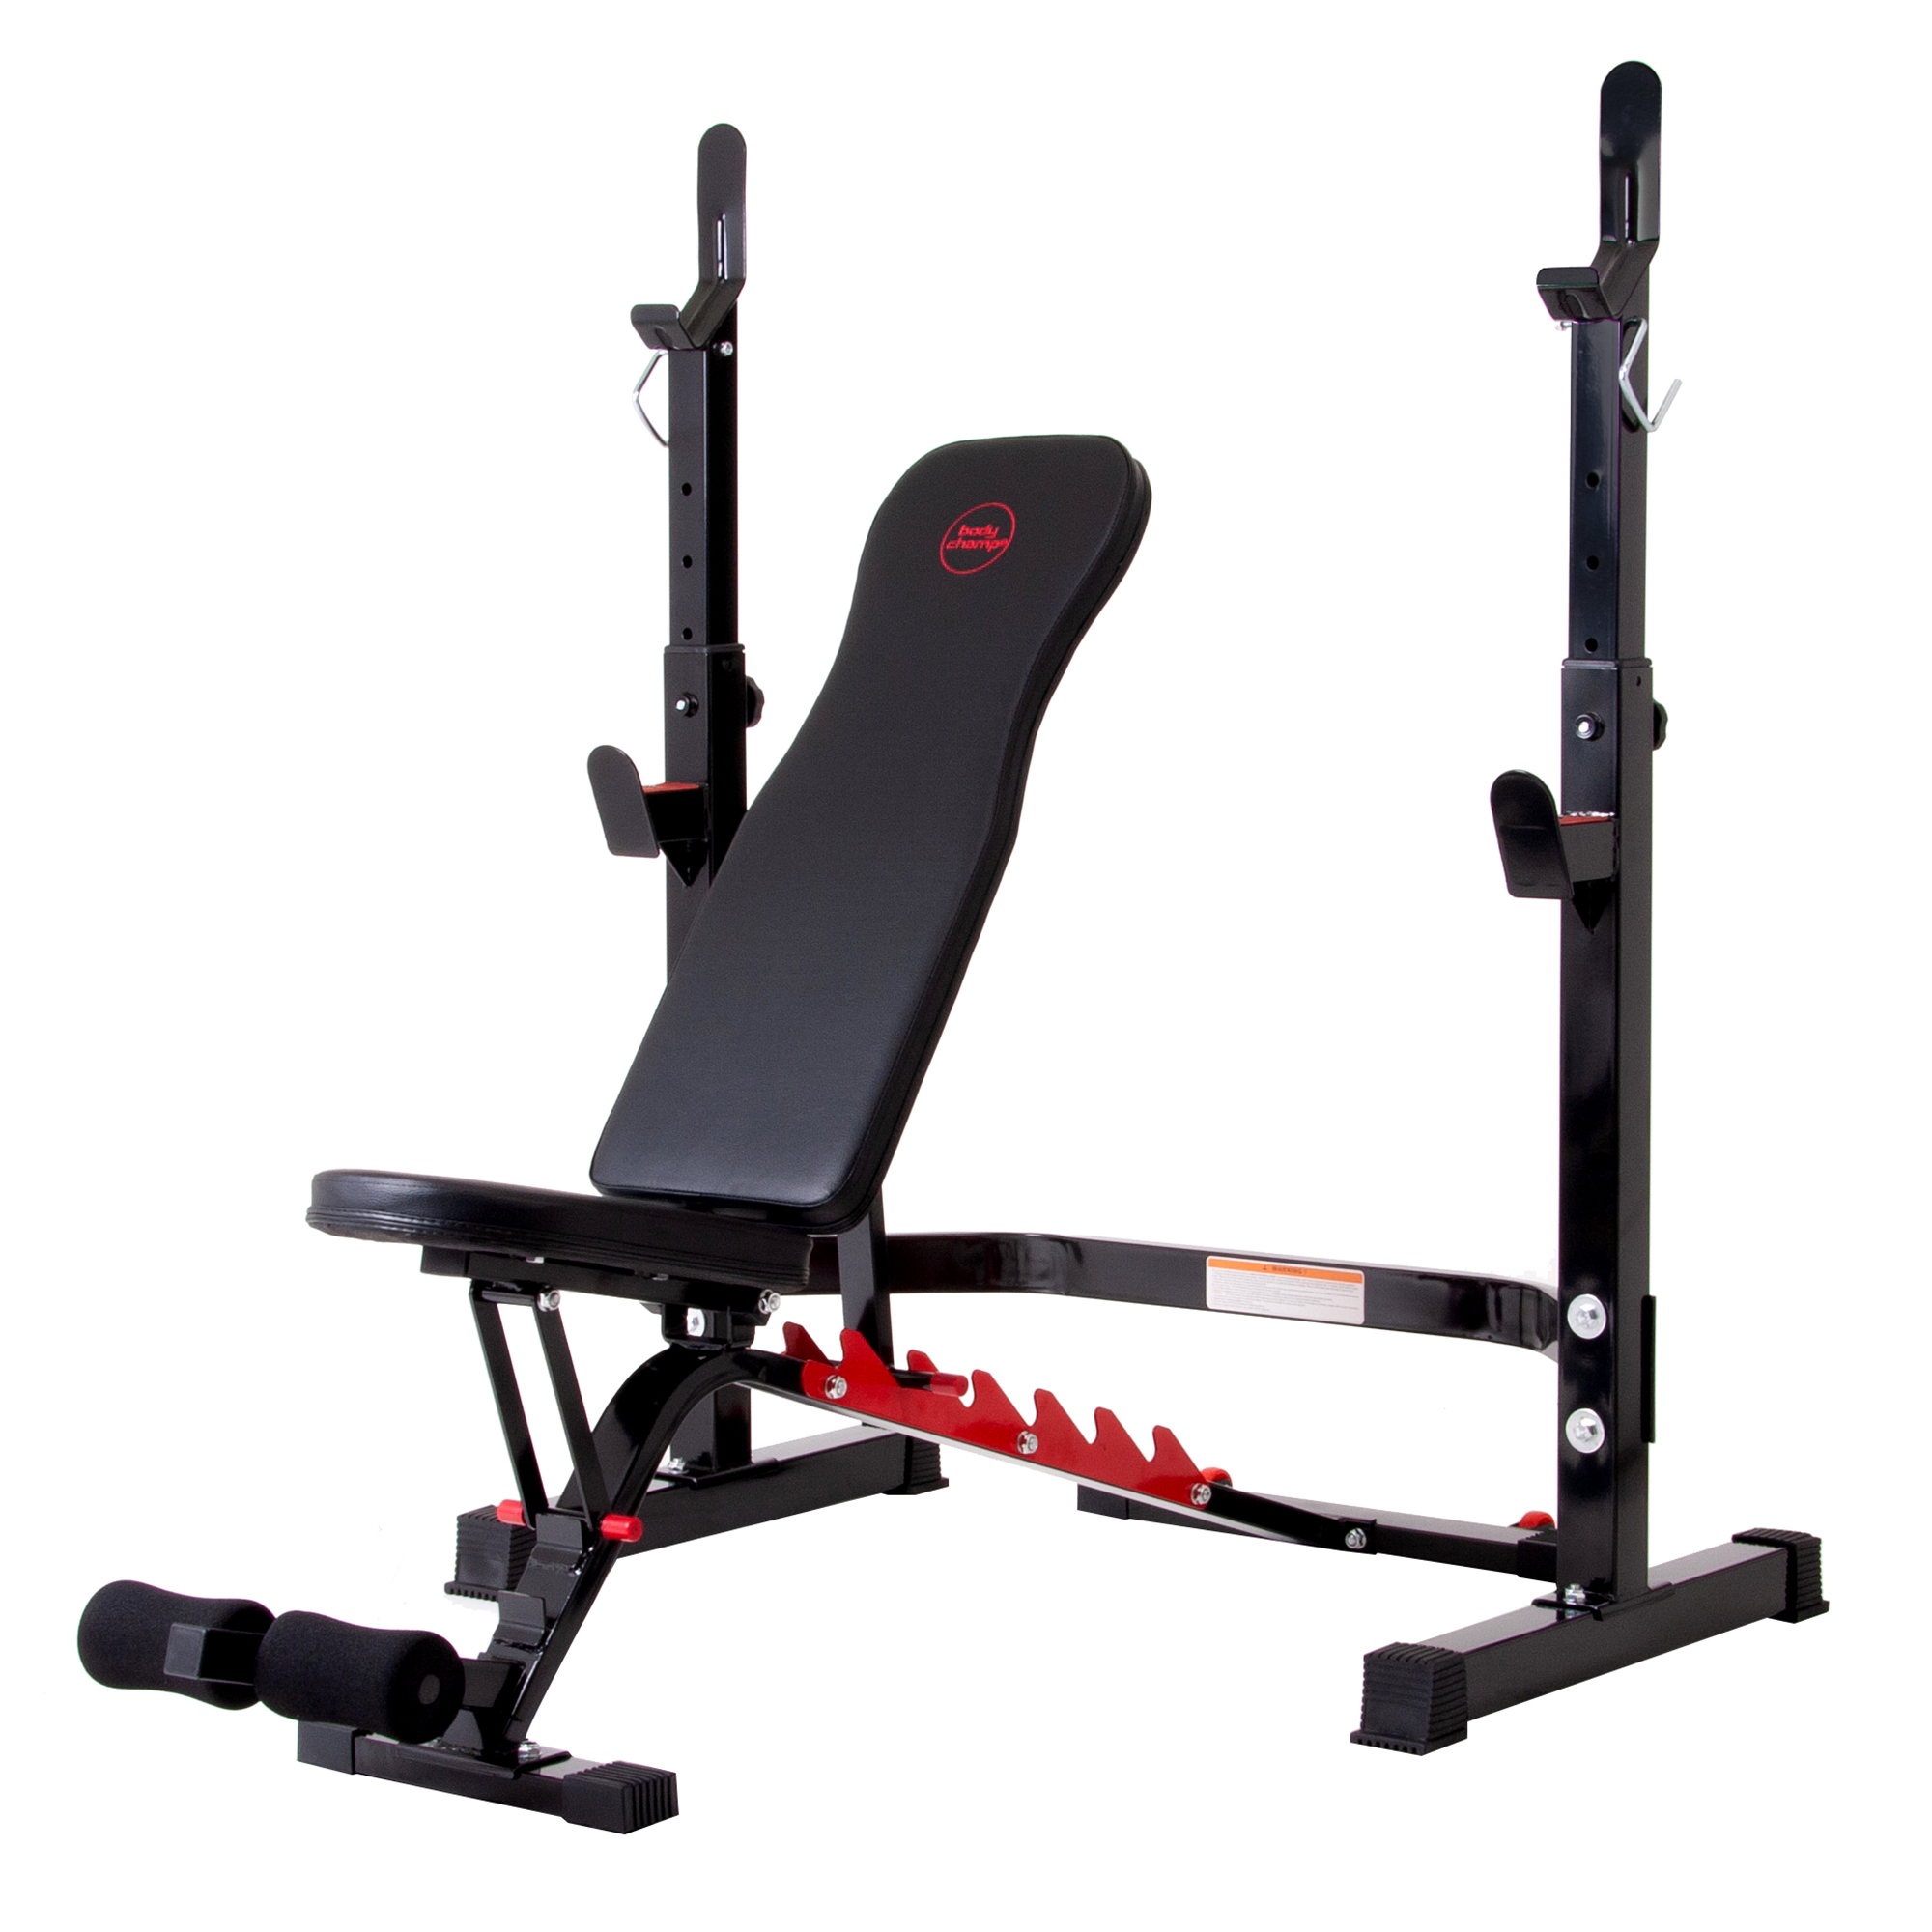 Body Champ BCB3578 Two-Piece Olympic Weight Bench with Adjustable Rack Combo, Max. Weight 300 lbs. - image 1 of 10